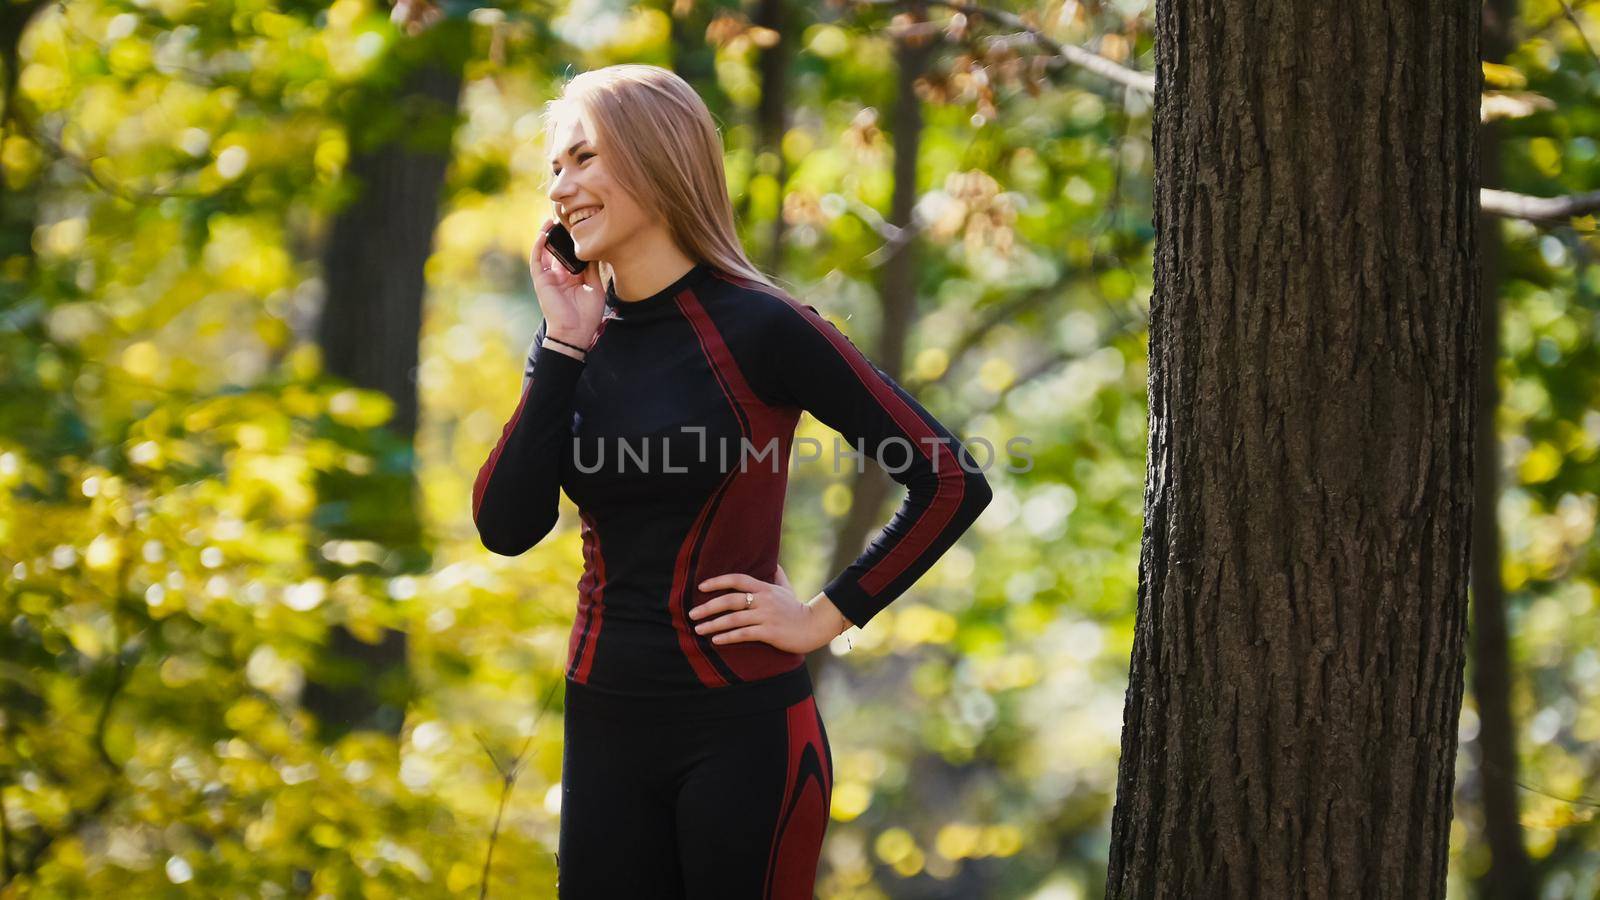 Young, sporty woman talking on cellphone and smiling at autumn park outdoor, close uptelephoto